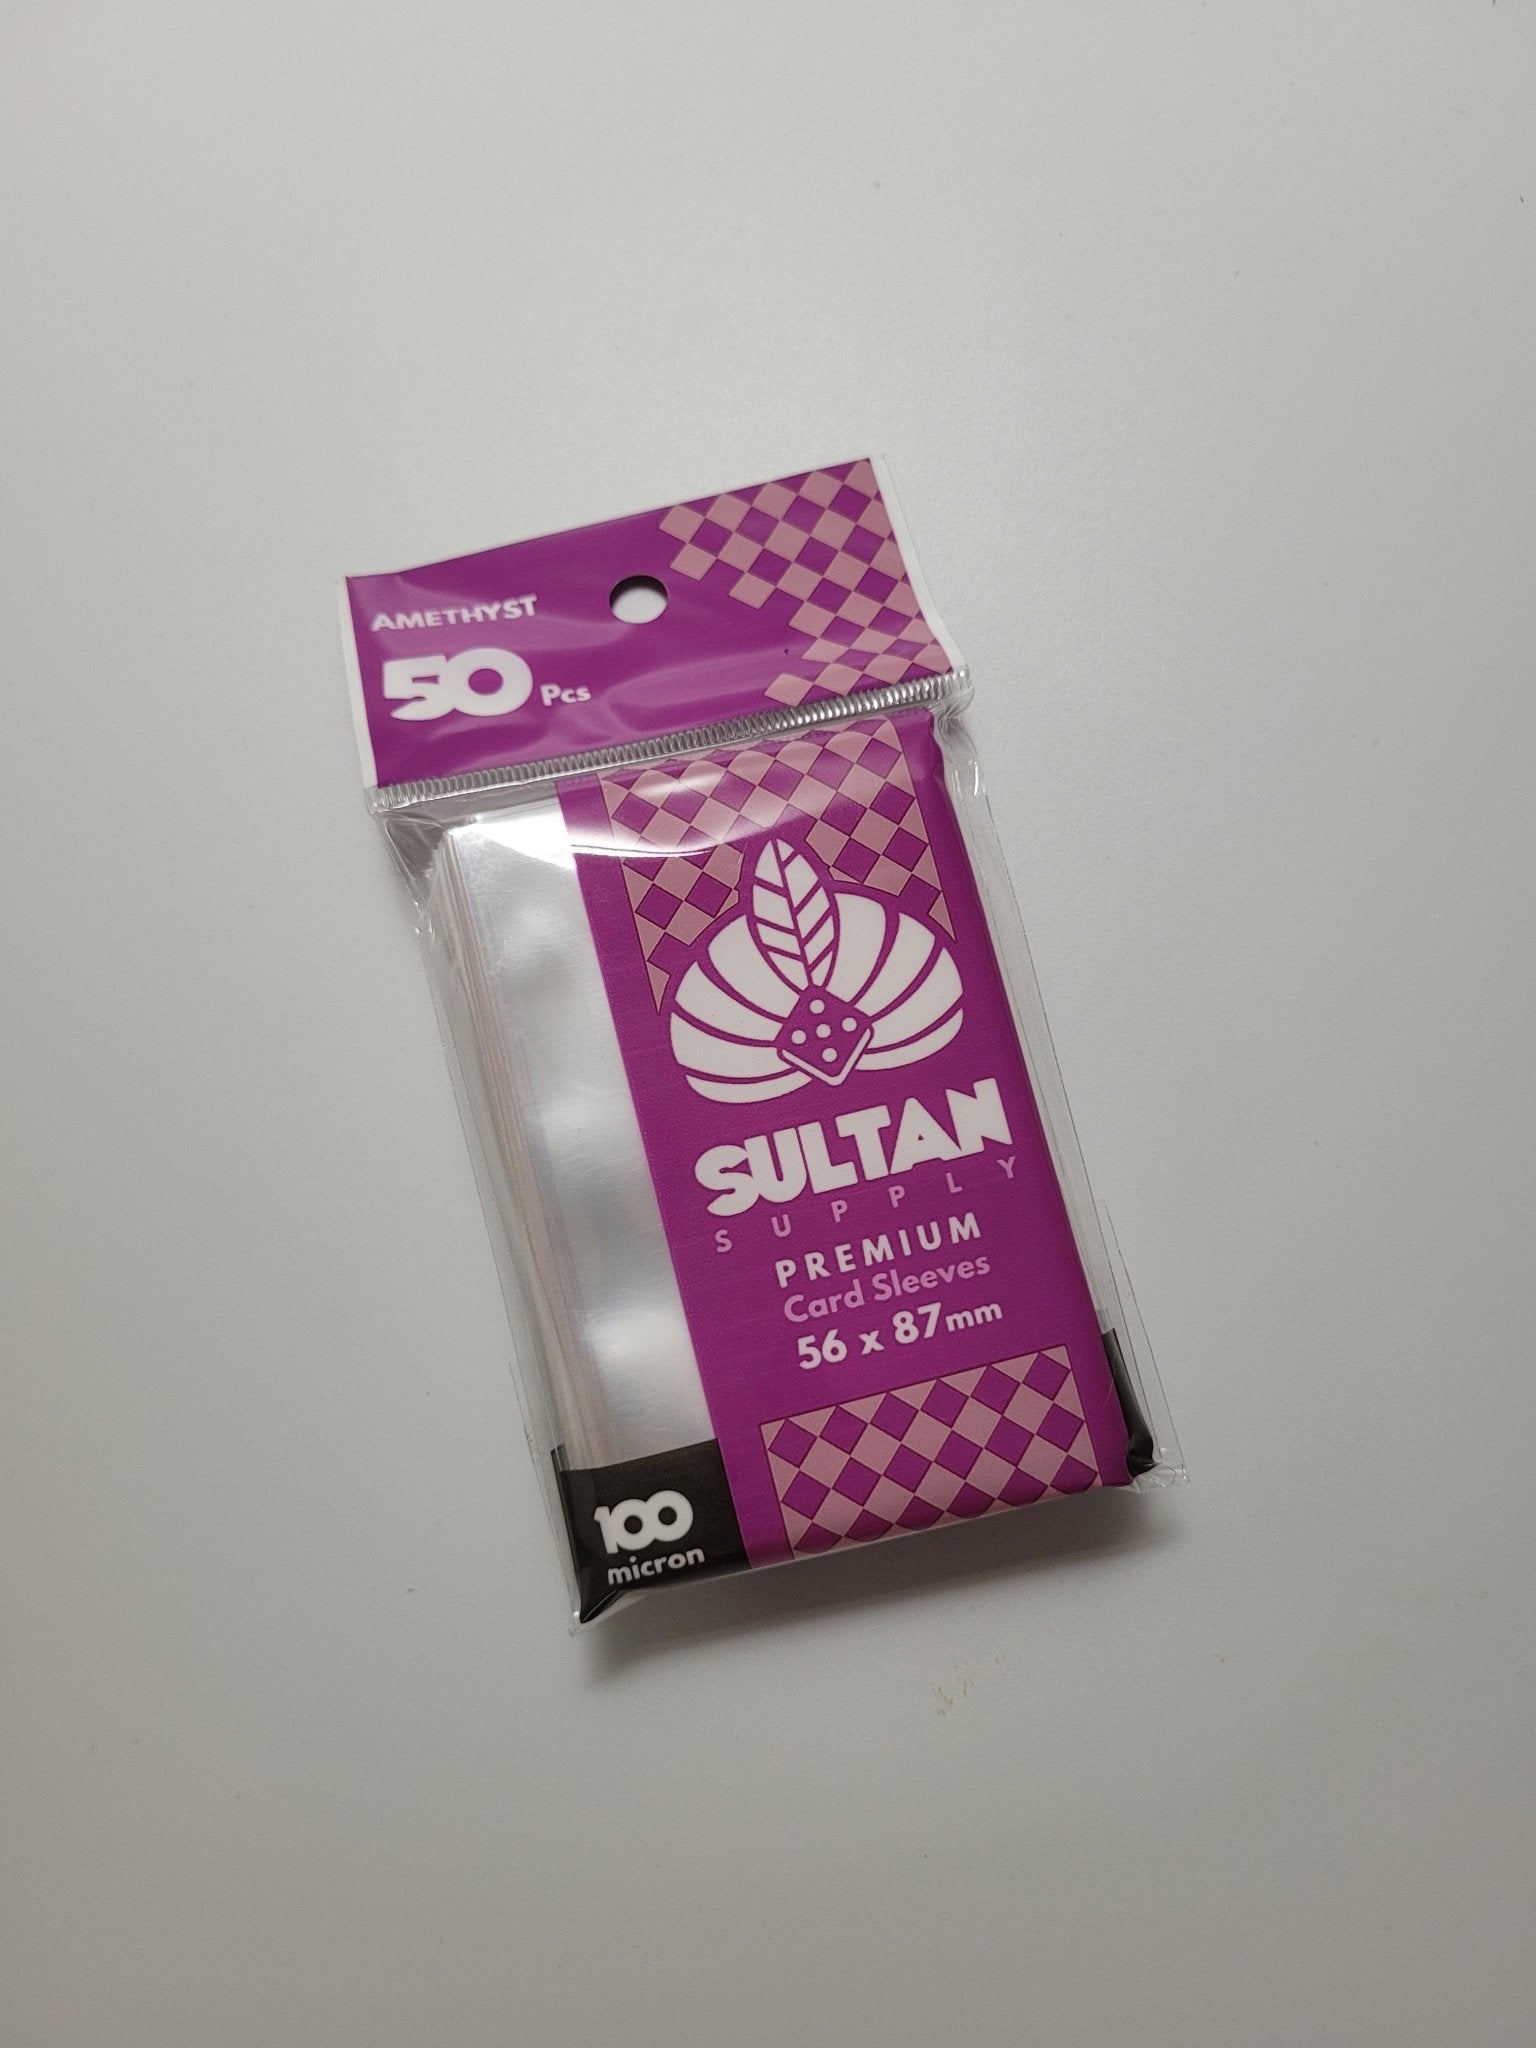 Sultan Supply Premium Card Sleeves: 56 x 87 mm Standard USA Amethyst (100 microns) - Gaming Library